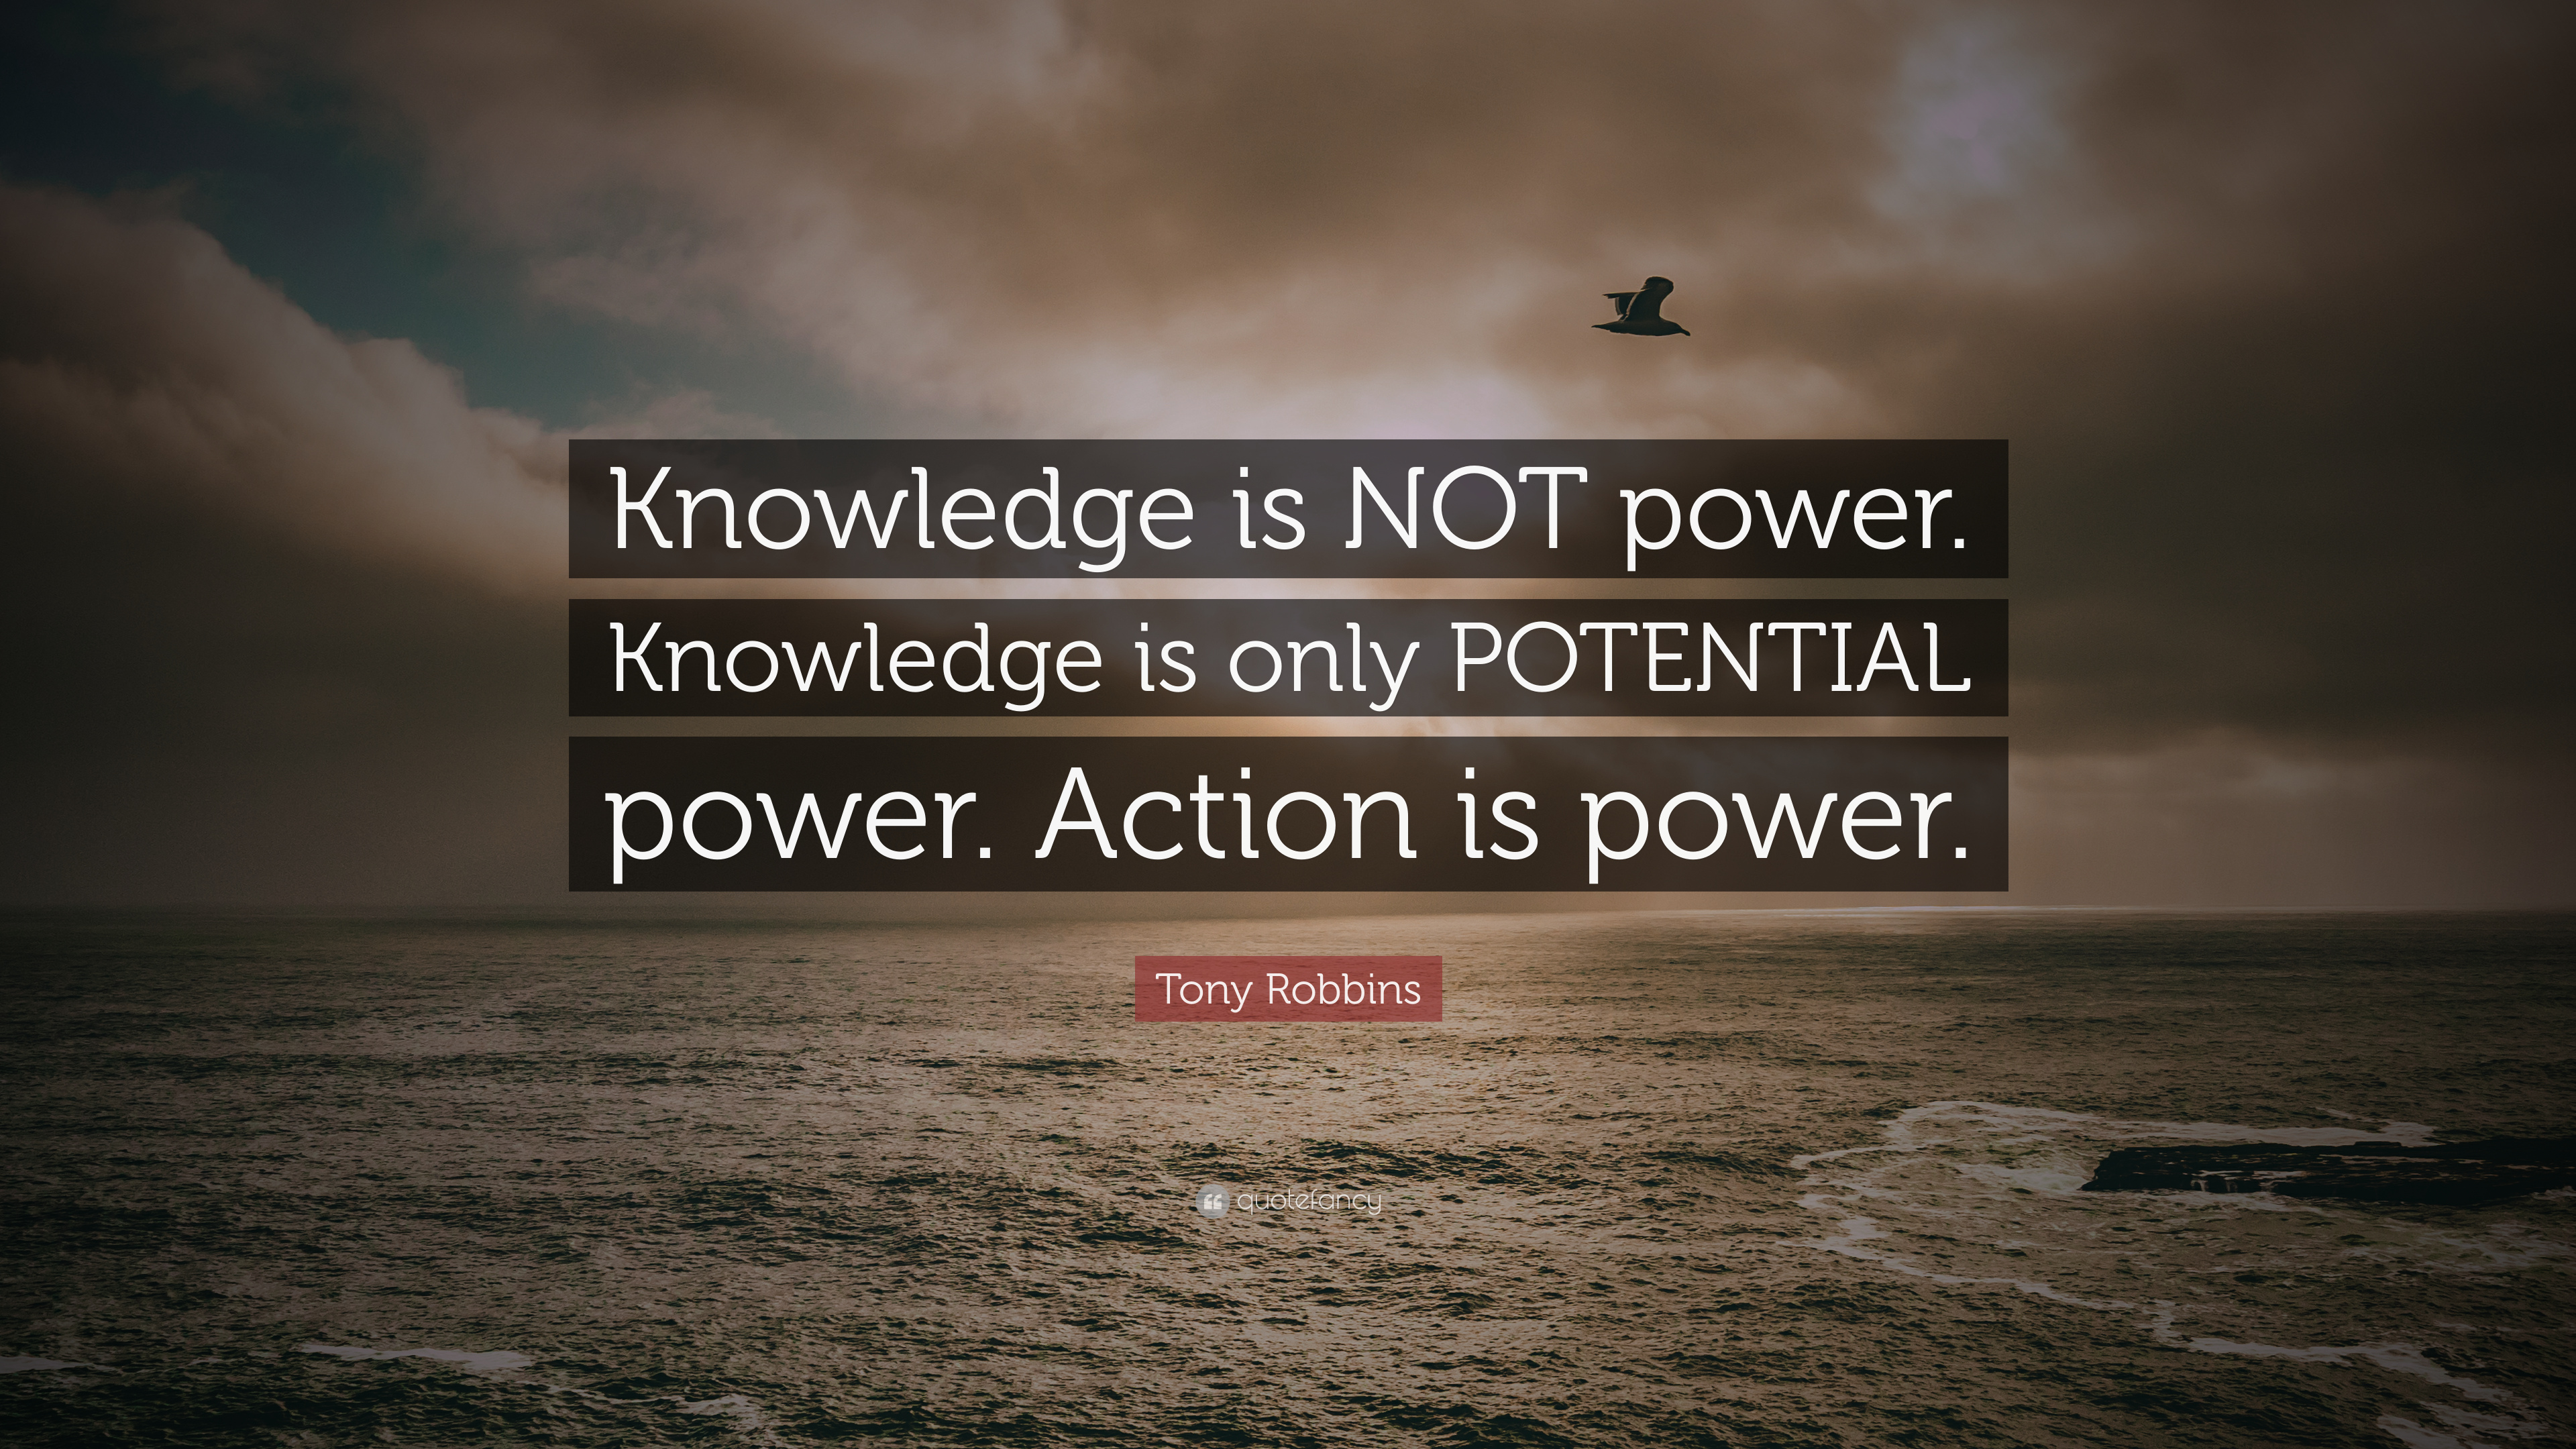 Why knowledge is not power? 